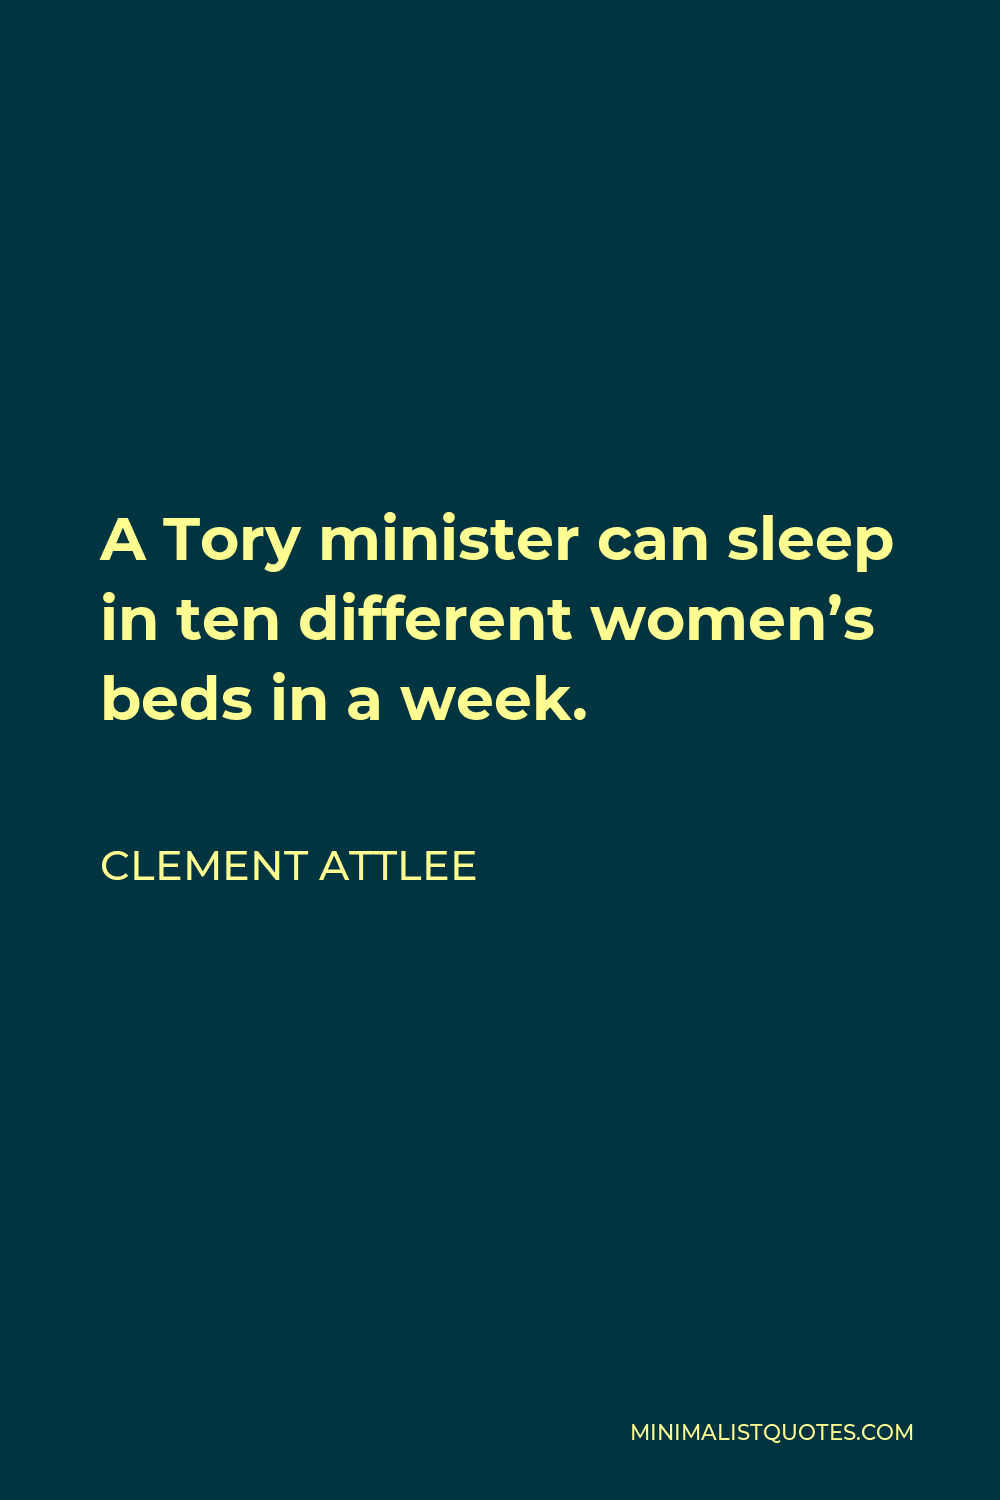 Clement Attlee Quote - A Tory minister can sleep in ten different women’s beds in a week.